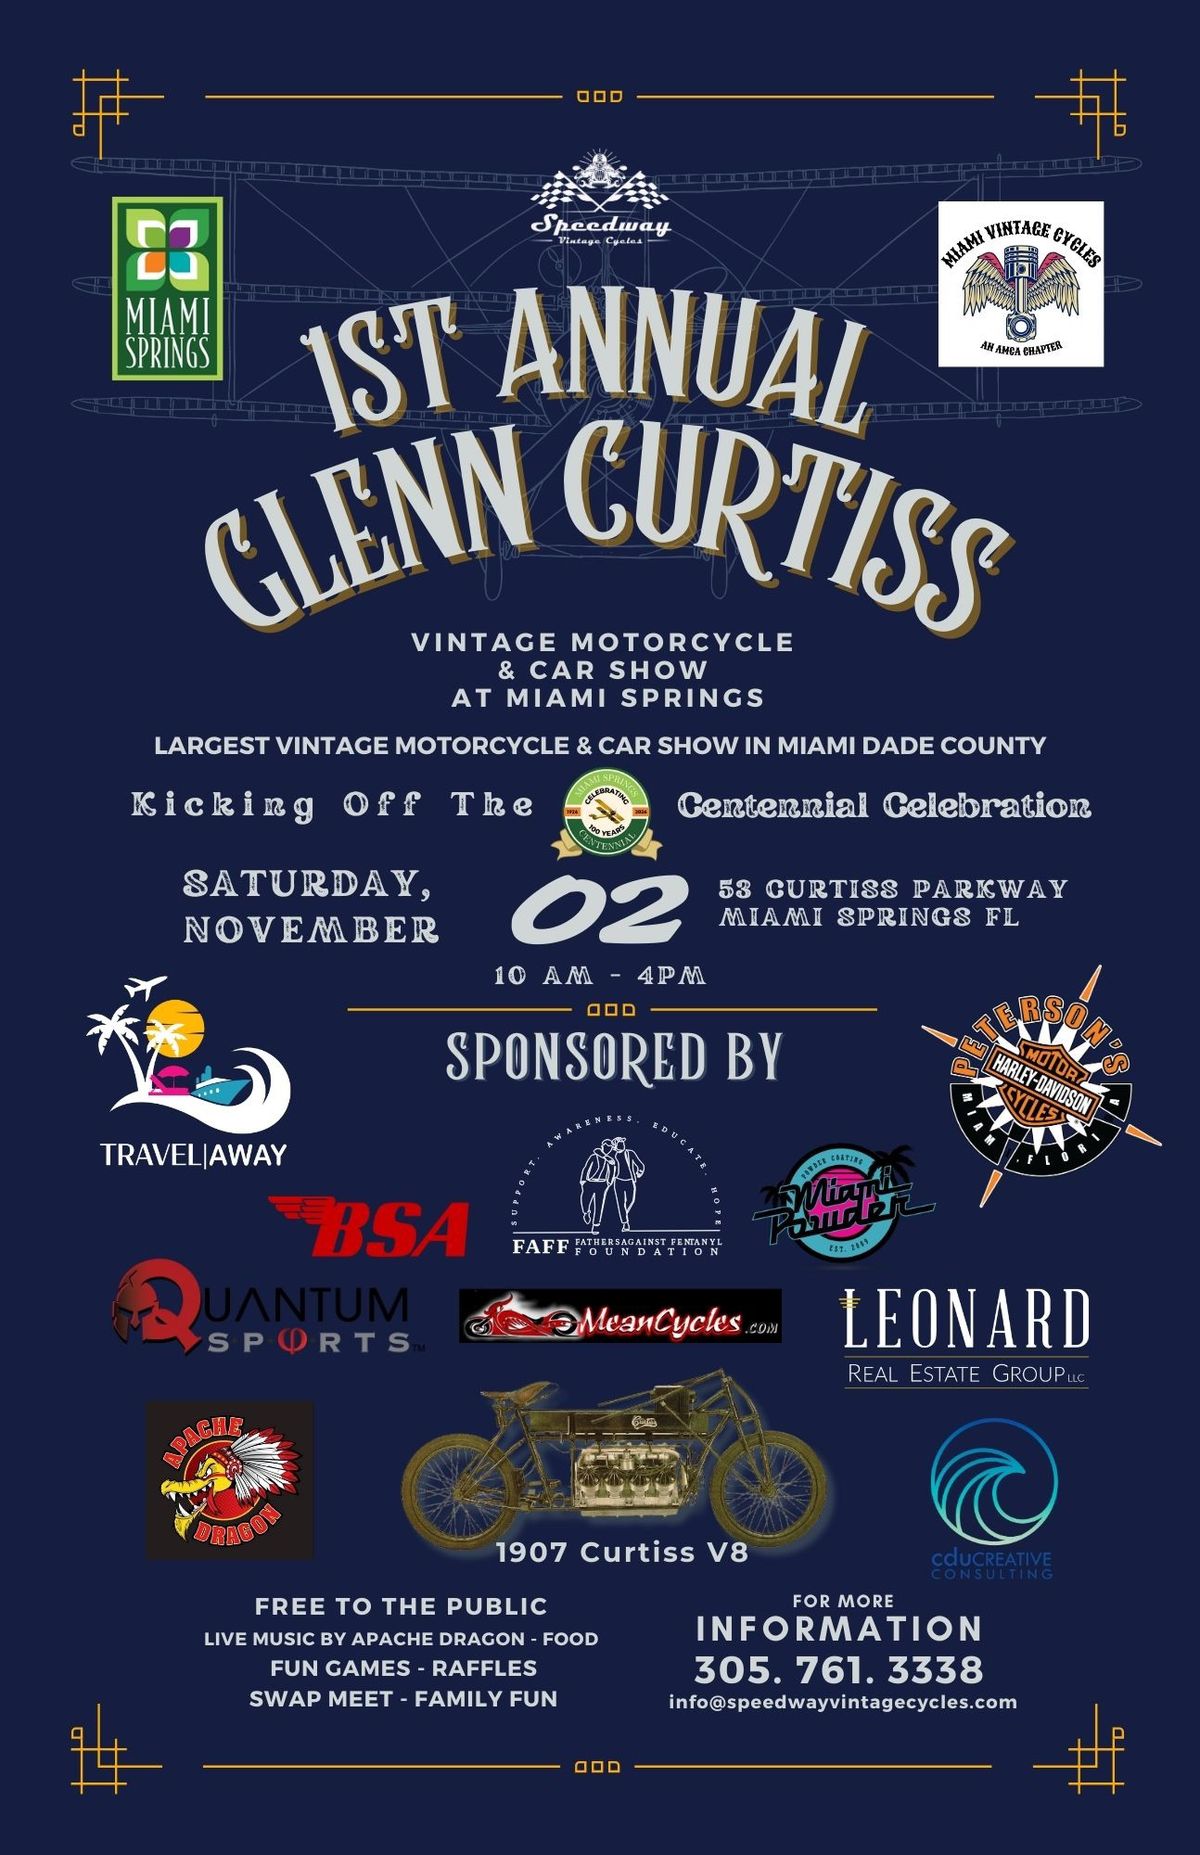 1st Annual Glenn Curtiss Vintage Motorcycle and Car Show